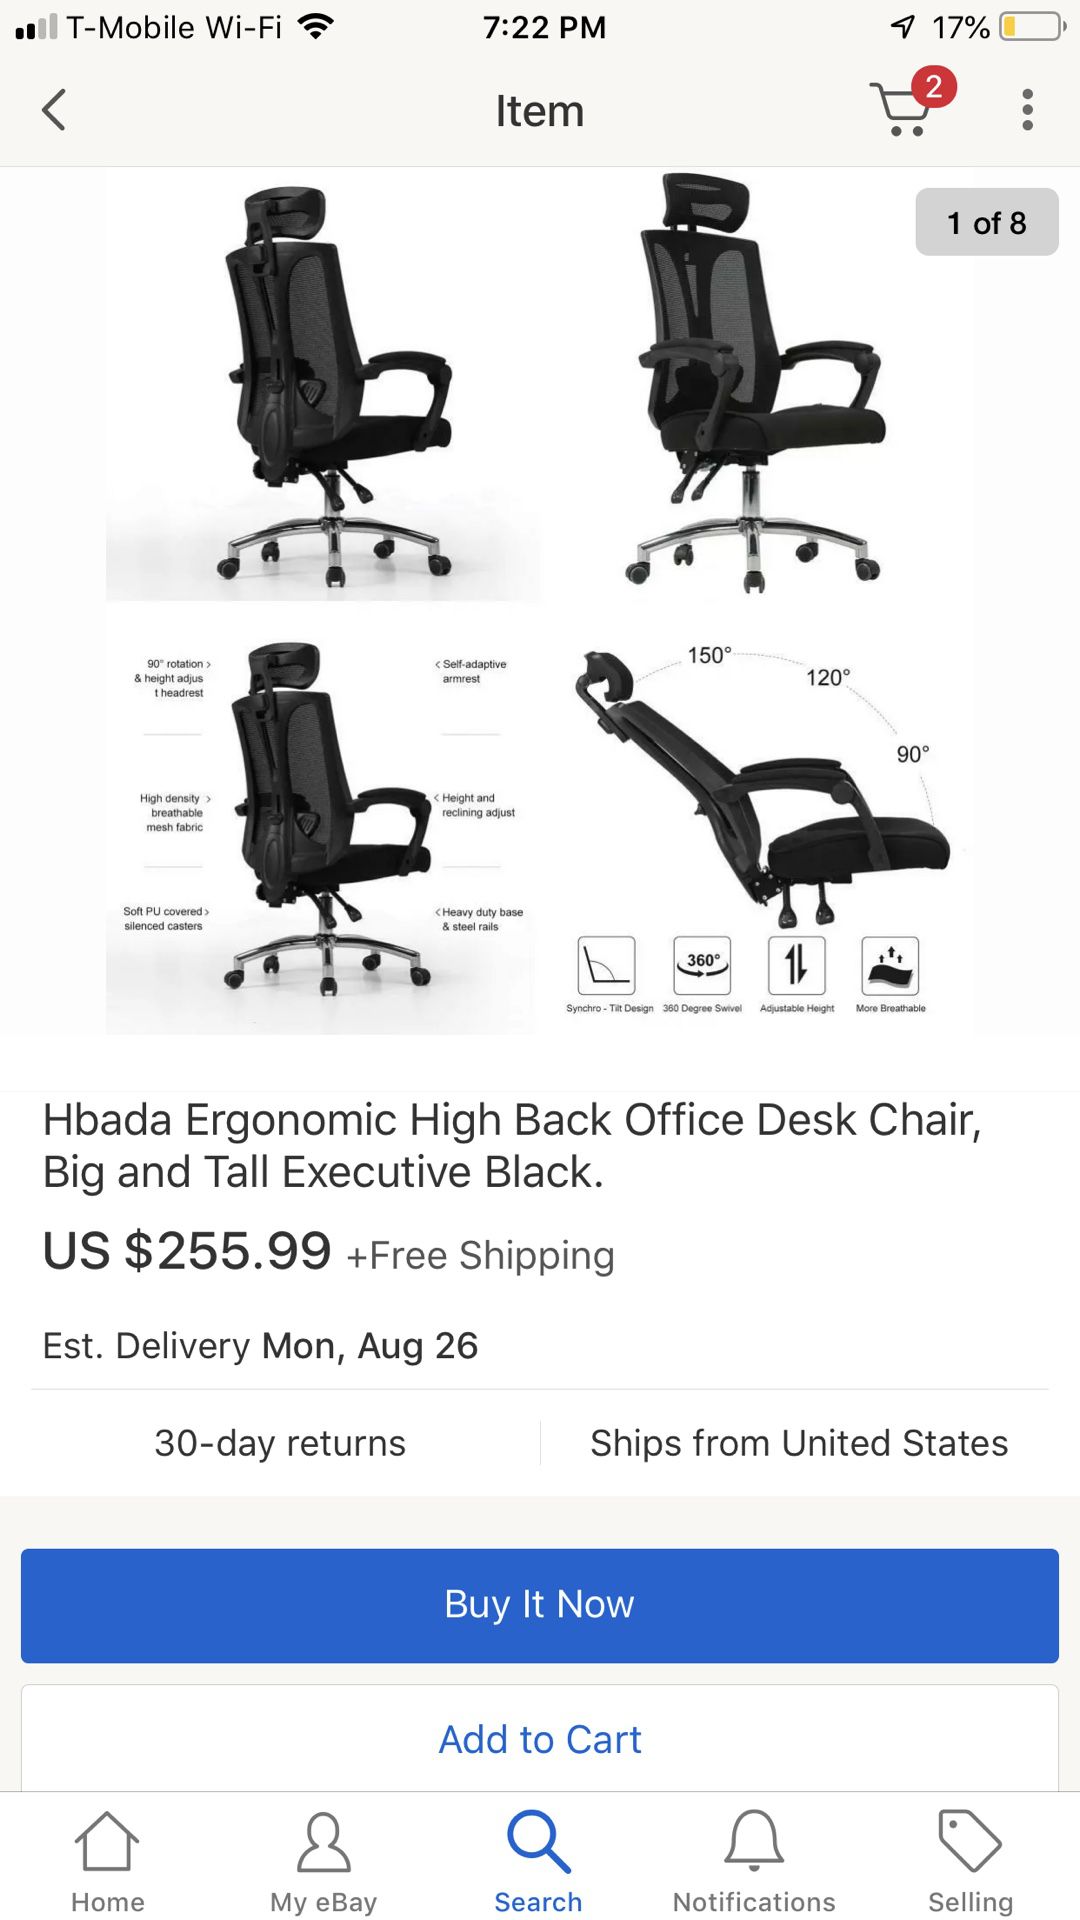 Ergonomic High Back Office Desk Chair, Big and Tall